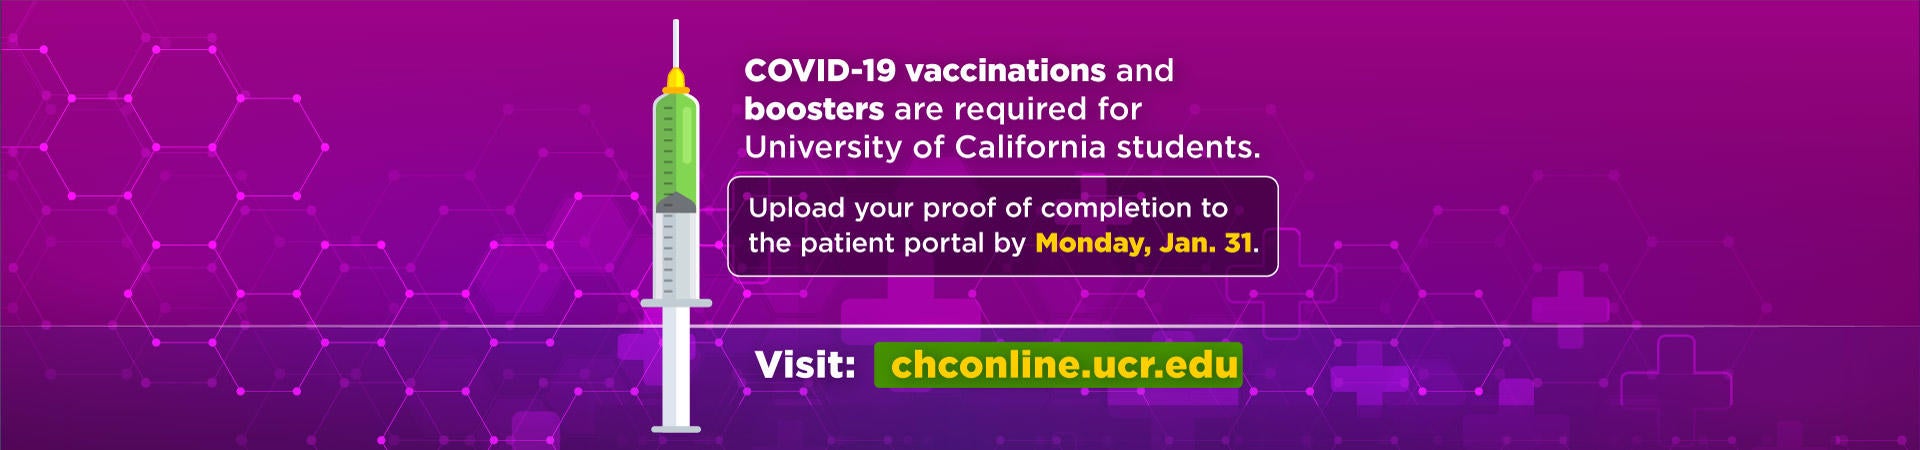 COVID-19 vaccinations and boosters are required for University of California students. Upload your proof of completion to the patient portal by Monday, Jan. 31. Visit: chconline.ucr.edu